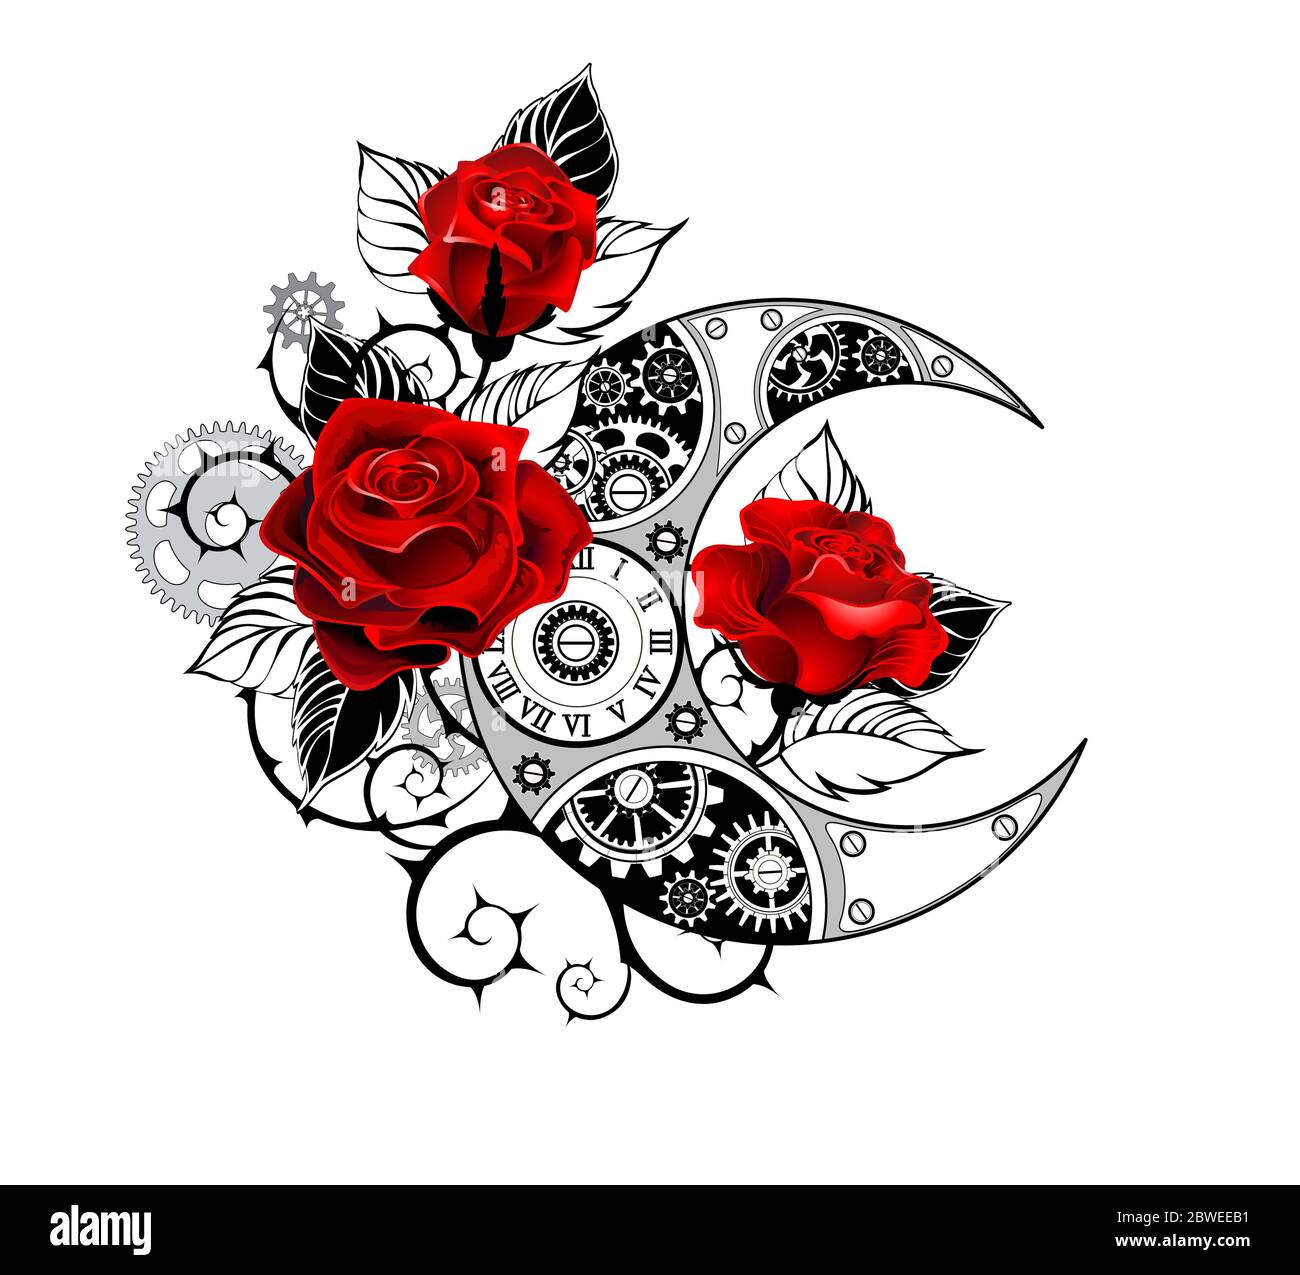 Contour, mechanical crescent moon with gears, decorated with red roses with black spiked stems and leaves on white background. Tattoo style. Stock Vector